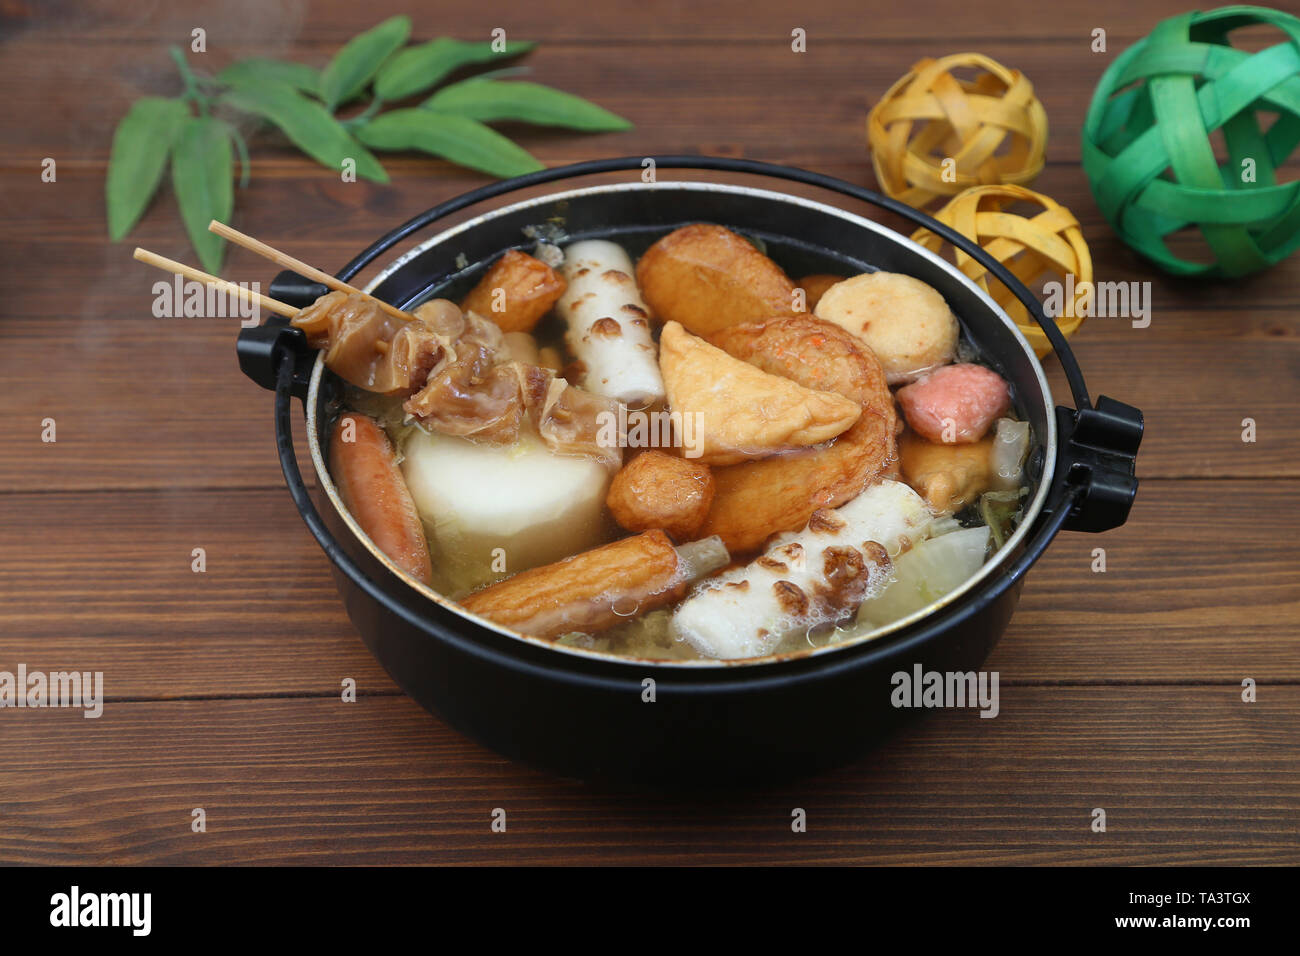 Oden (Japanese One Pot Simmered Dish) - Roti n Rice